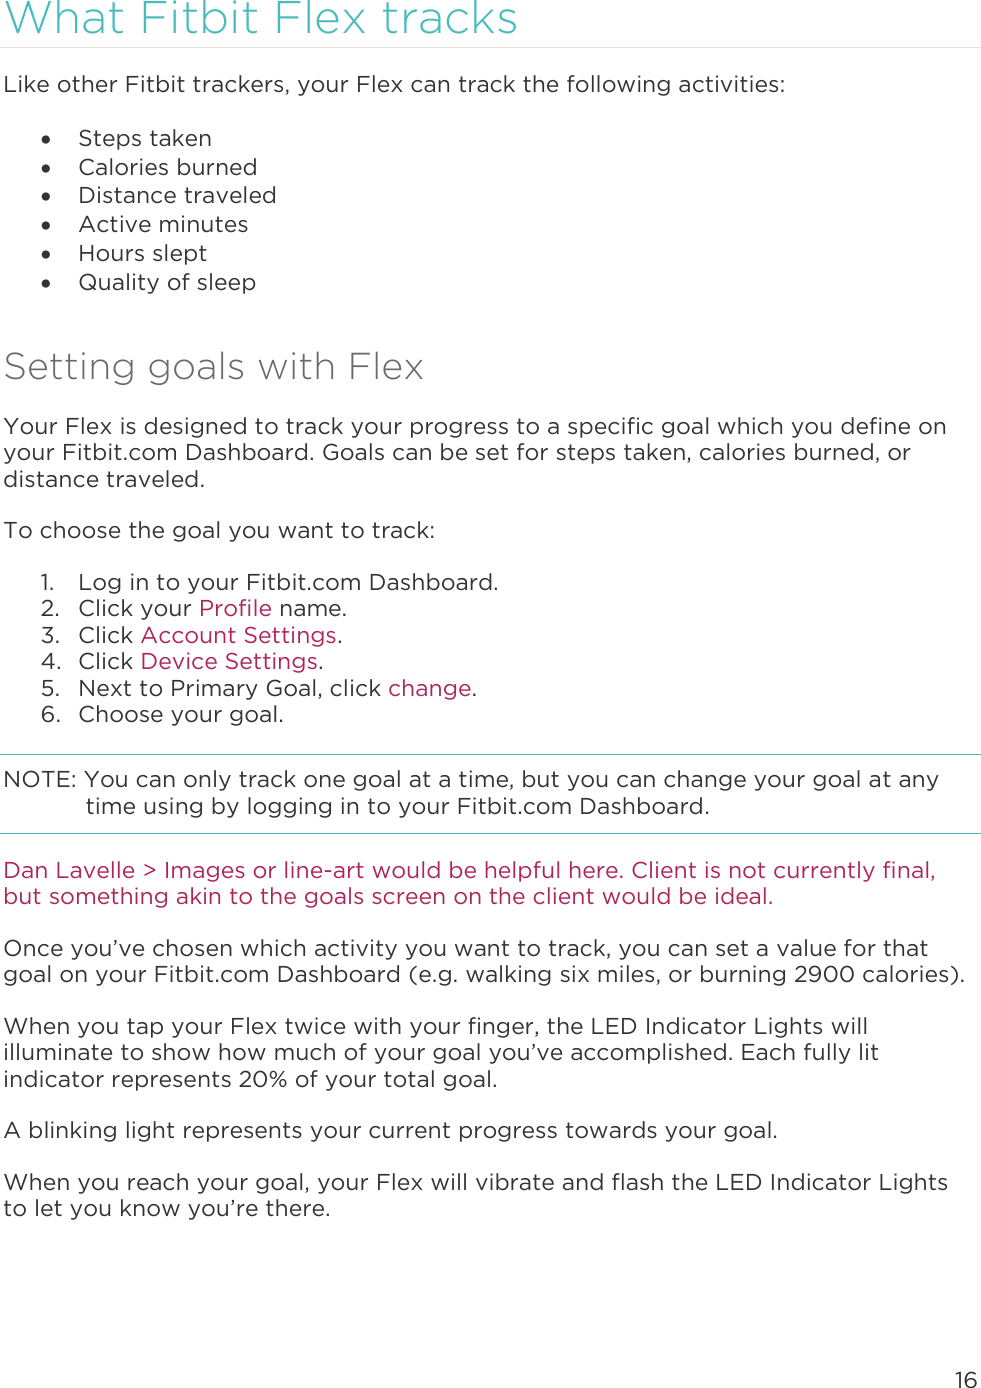 16  What Fitbit Flex tracks Like other Fitbit trackers, your Flex can track the following activities:   Steps taken  Calories burned  Distance traveled  Active minutes  Hours slept  Quality of sleep Setting goals with Flex Your Flex is designed to track your progress to a specific goal which you define on your Fitbit.com Dashboard. Goals can be set for steps taken, calories burned, or distance traveled.  To choose the goal you want to track:  1. Log in to your Fitbit.com Dashboard.  2. Click your Profile name.  3. Click Account Settings.  4. Click Device Settings.  5. Next to Primary Goal, click change.  6. Choose your goal.  NOTE: You can only track one goal at a time, but you can change your goal at any time using by logging in to your Fitbit.com Dashboard.  Dan Lavelle &gt; Images or line-art would be helpful here. Client is not currently final, but something akin to the goals screen on the client would be ideal. Once you’ve chosen which activity you want to track, you can set a value for that goal on your Fitbit.com Dashboard (e.g. walking six miles, or burning 2900 calories). When you tap your Flex twice with your finger, the LED Indicator Lights will illuminate to show how much of your goal you’ve accomplished. Each fully lit indicator represents 20% of your total goal.  A blinking light represents your current progress towards your goal.  When you reach your goal, your Flex will vibrate and flash the LED Indicator Lights to let you know you’re there.   